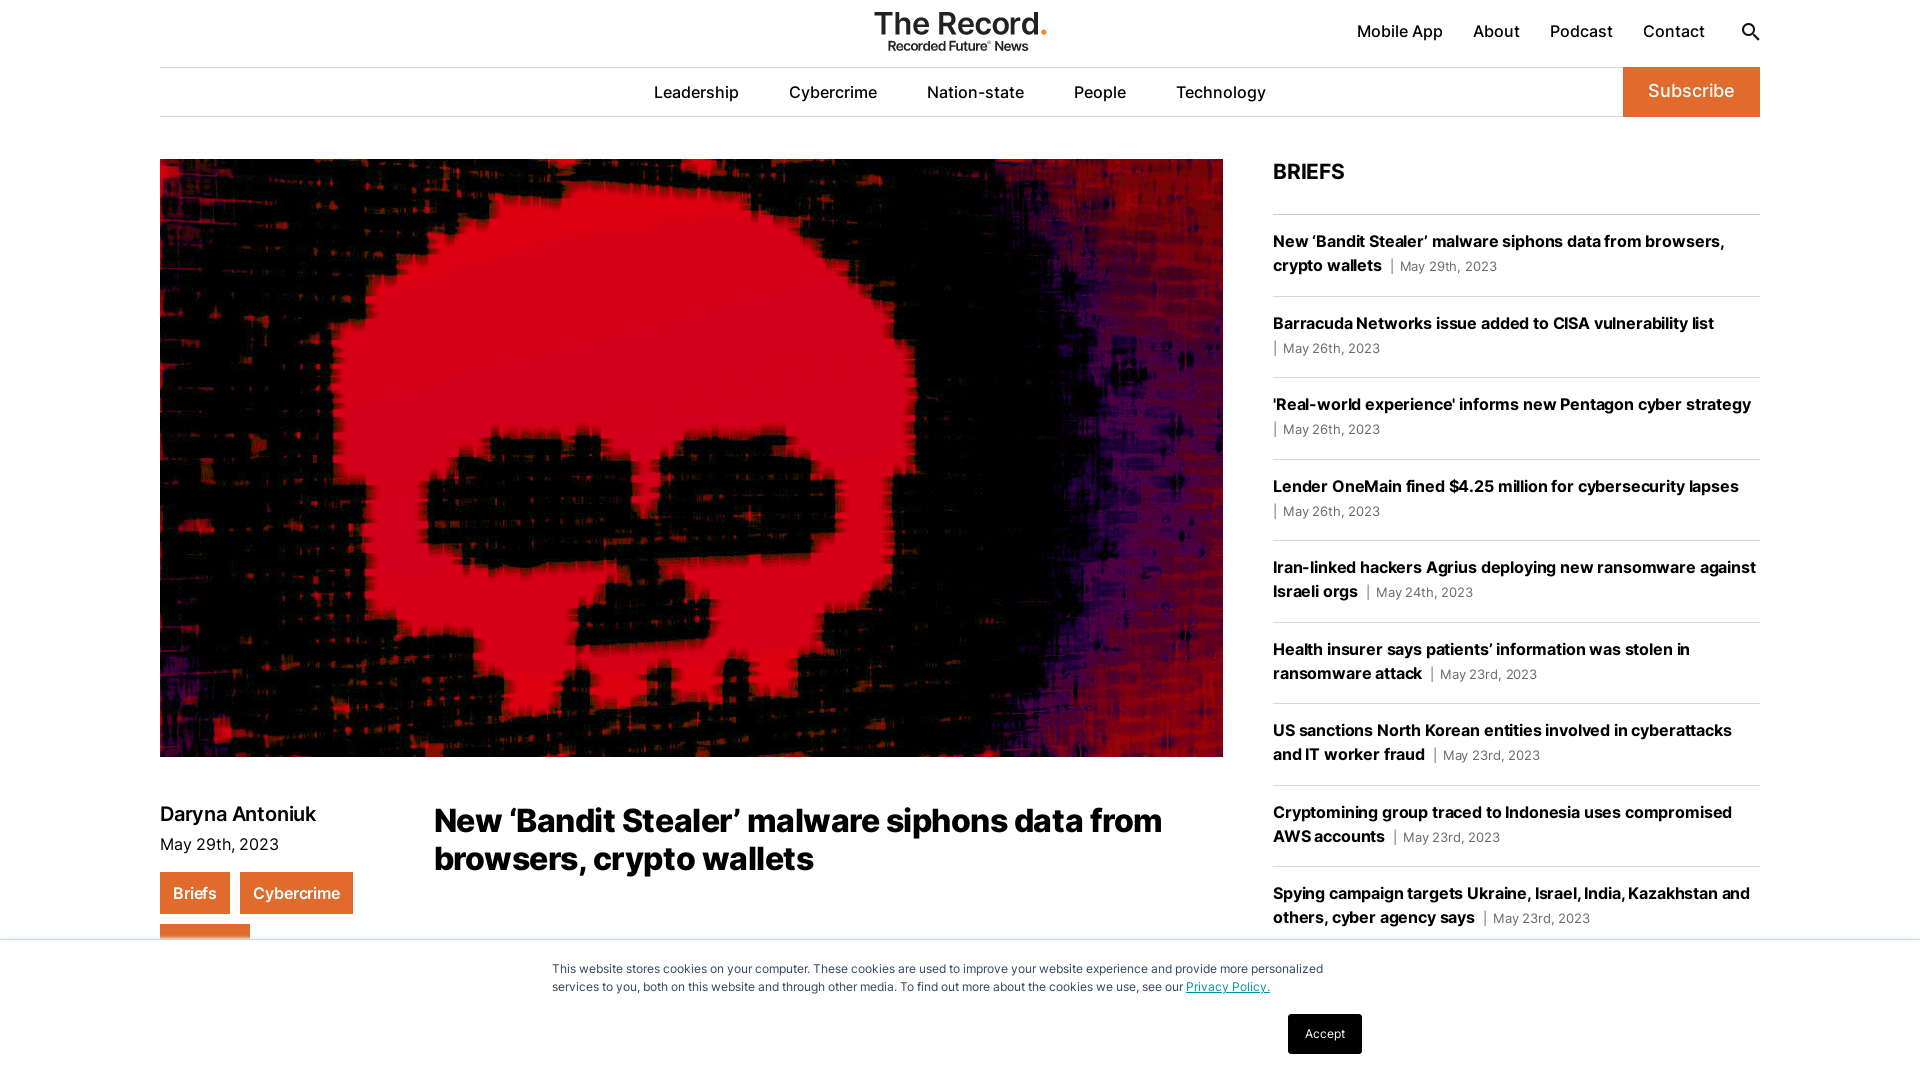 New ‘Bandit Stealer’ malware siphons data from browsers, crypto wallets